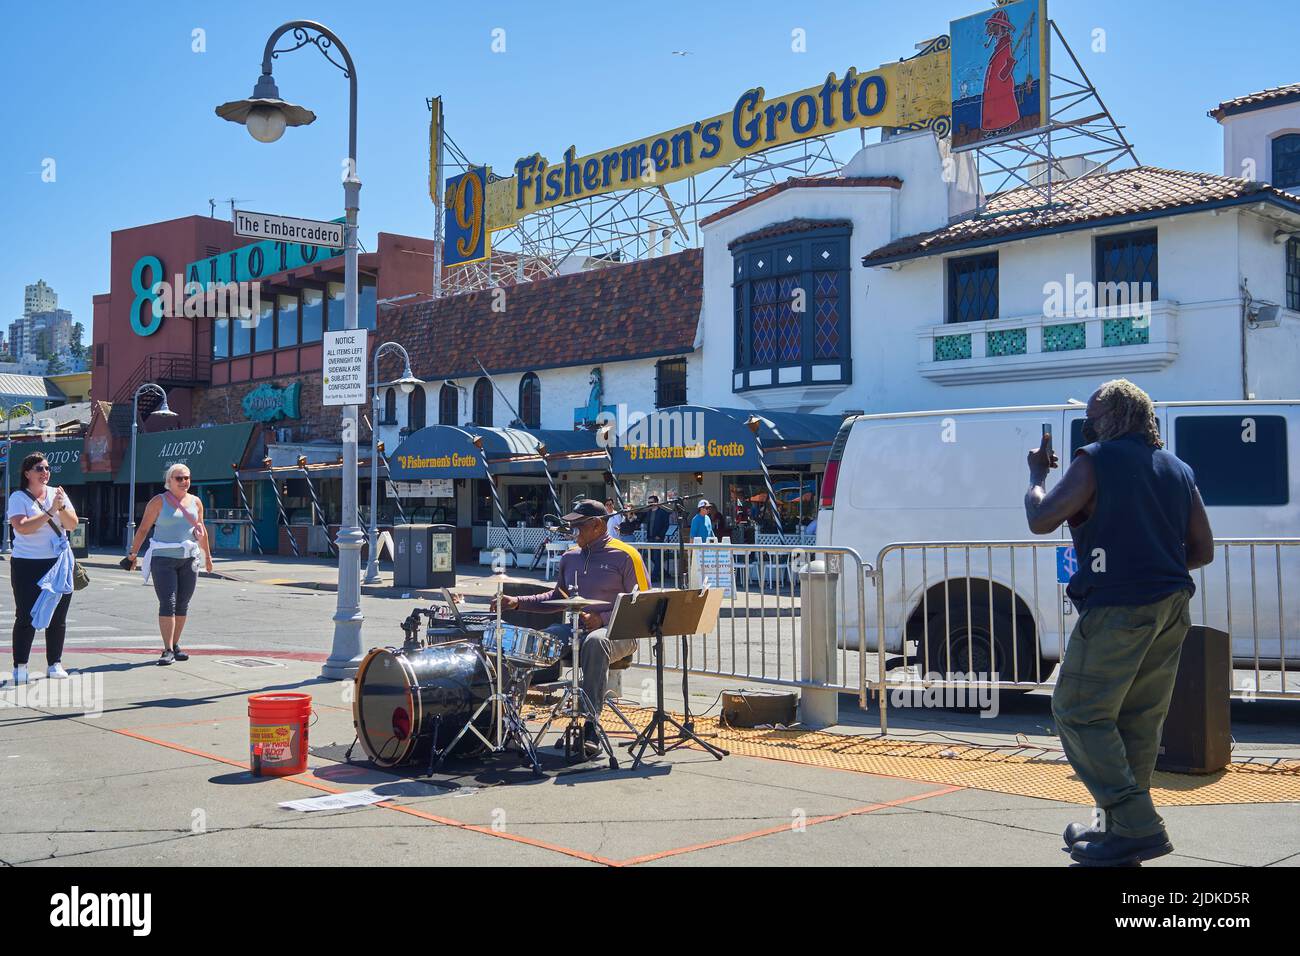 A black man on drums plays music near Fisherman's Grotto at Pier 45 in San Francisco, California. Stock Photo